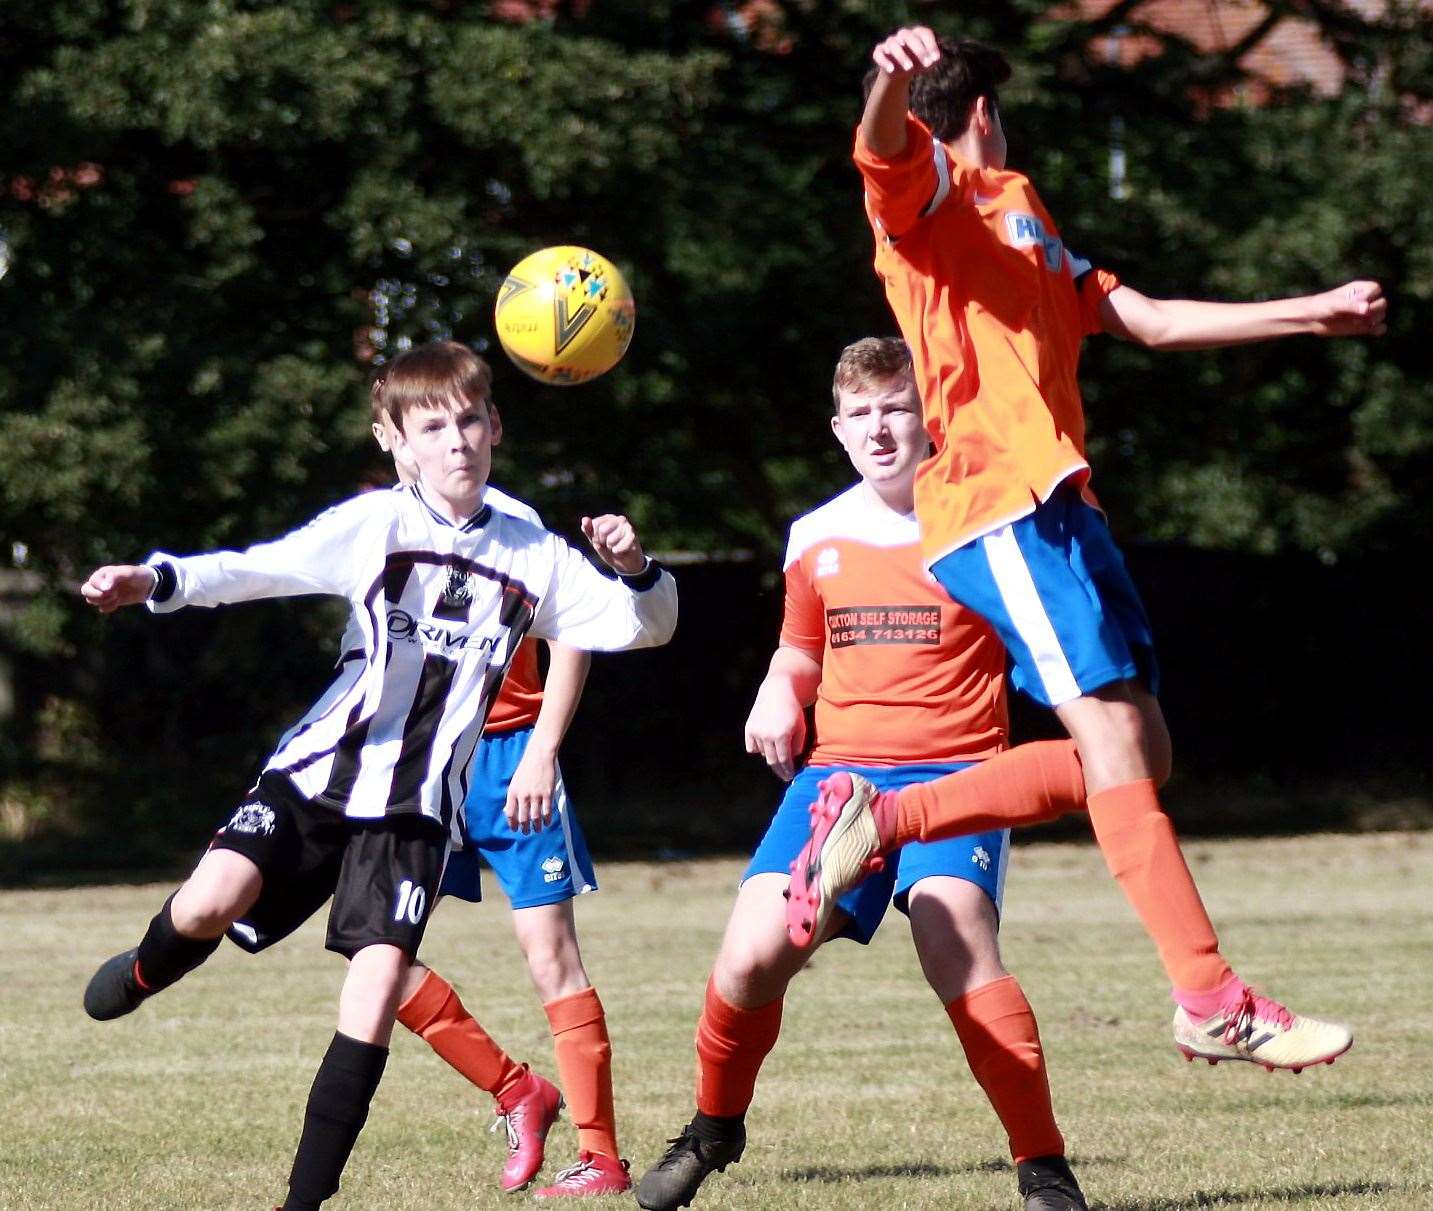 Milton & Fulston (stripes) and Cuxton 91 clashed in Under-15 Division 1 Picture: Phil Lee